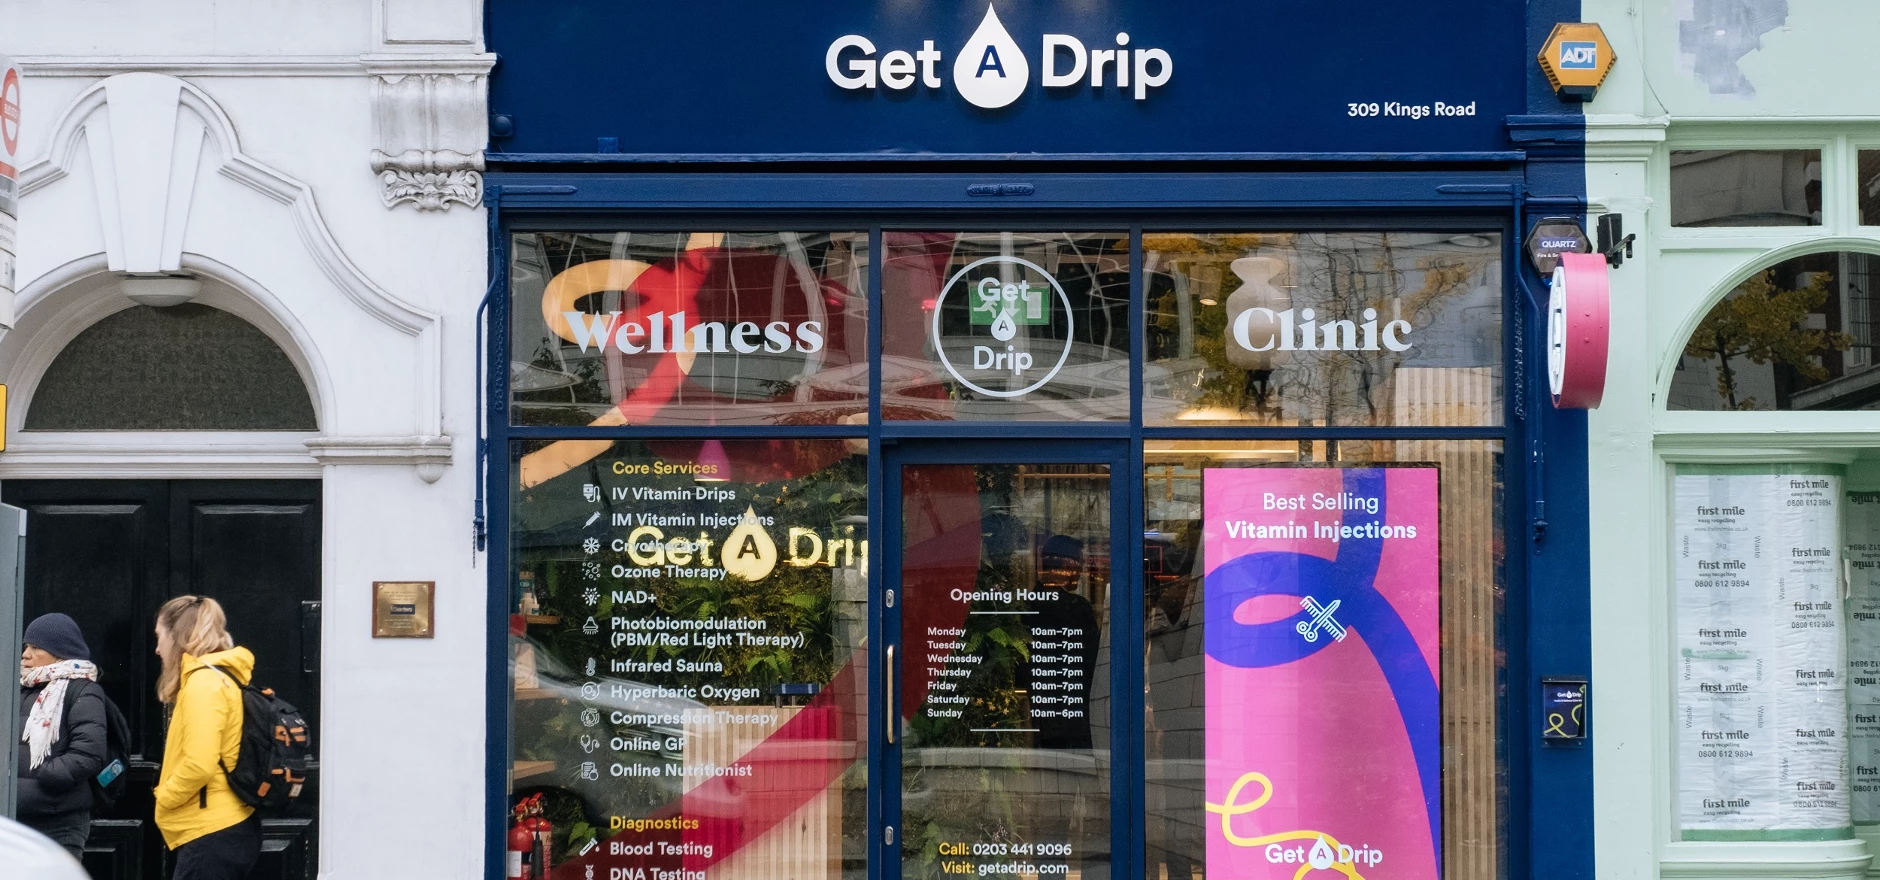 Get A Drip King's Road Clinic in Chelsea, London 